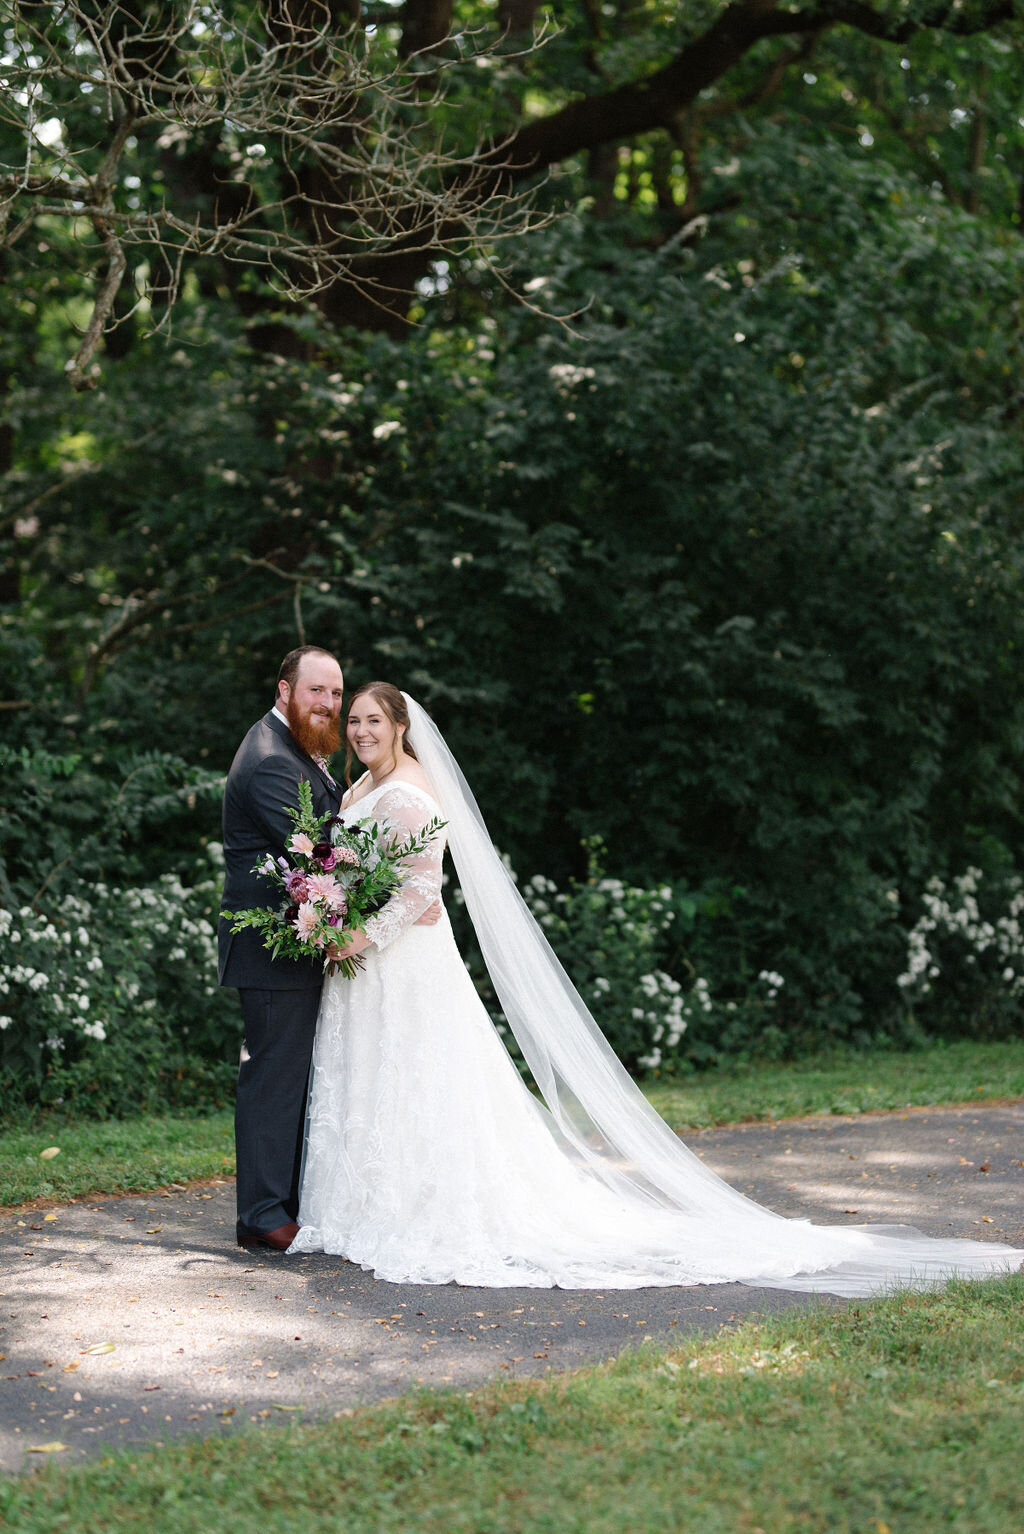 West Lafayette ecclectic wedding with rich colors by Burman Photography15